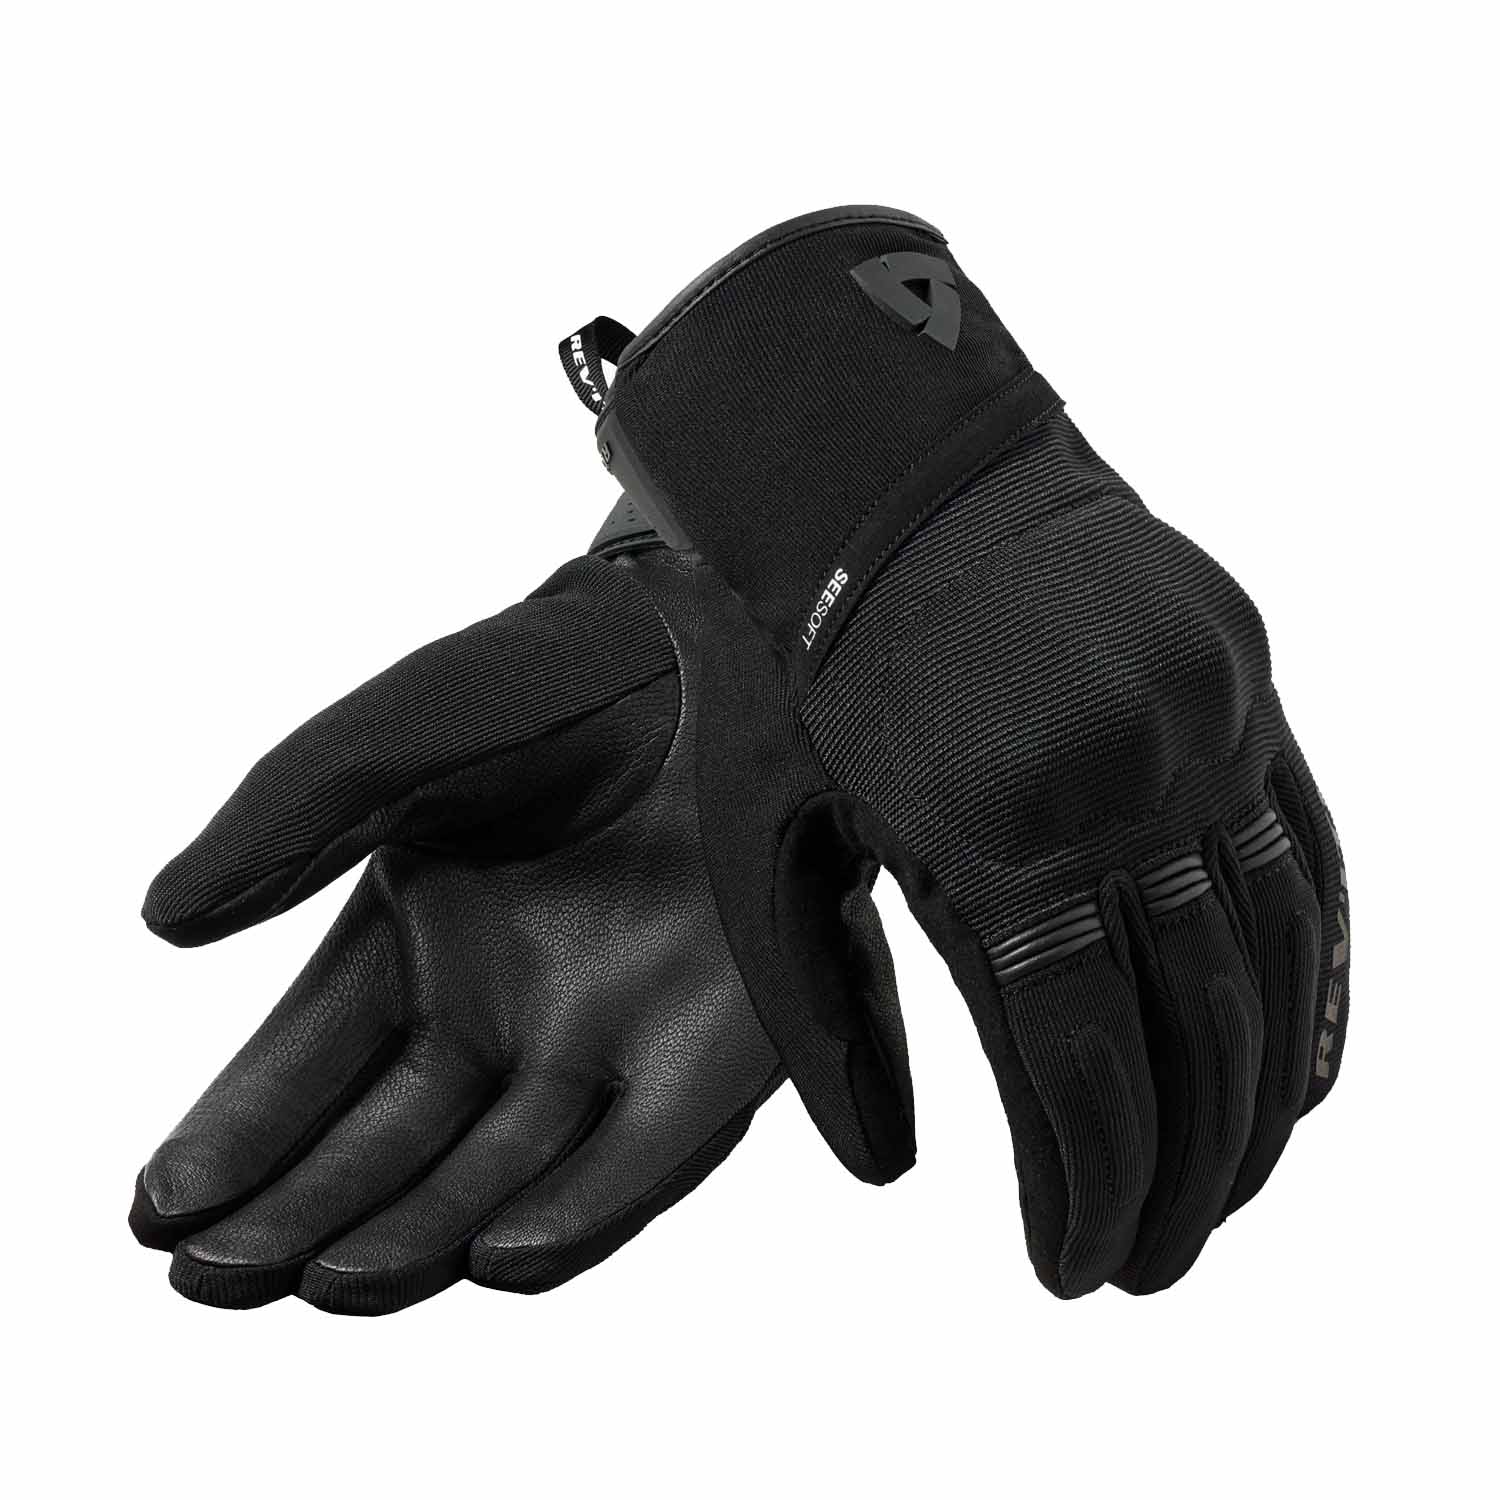 Image of REV'IT! Mosca 2 H2O Gloves Black Taille XS